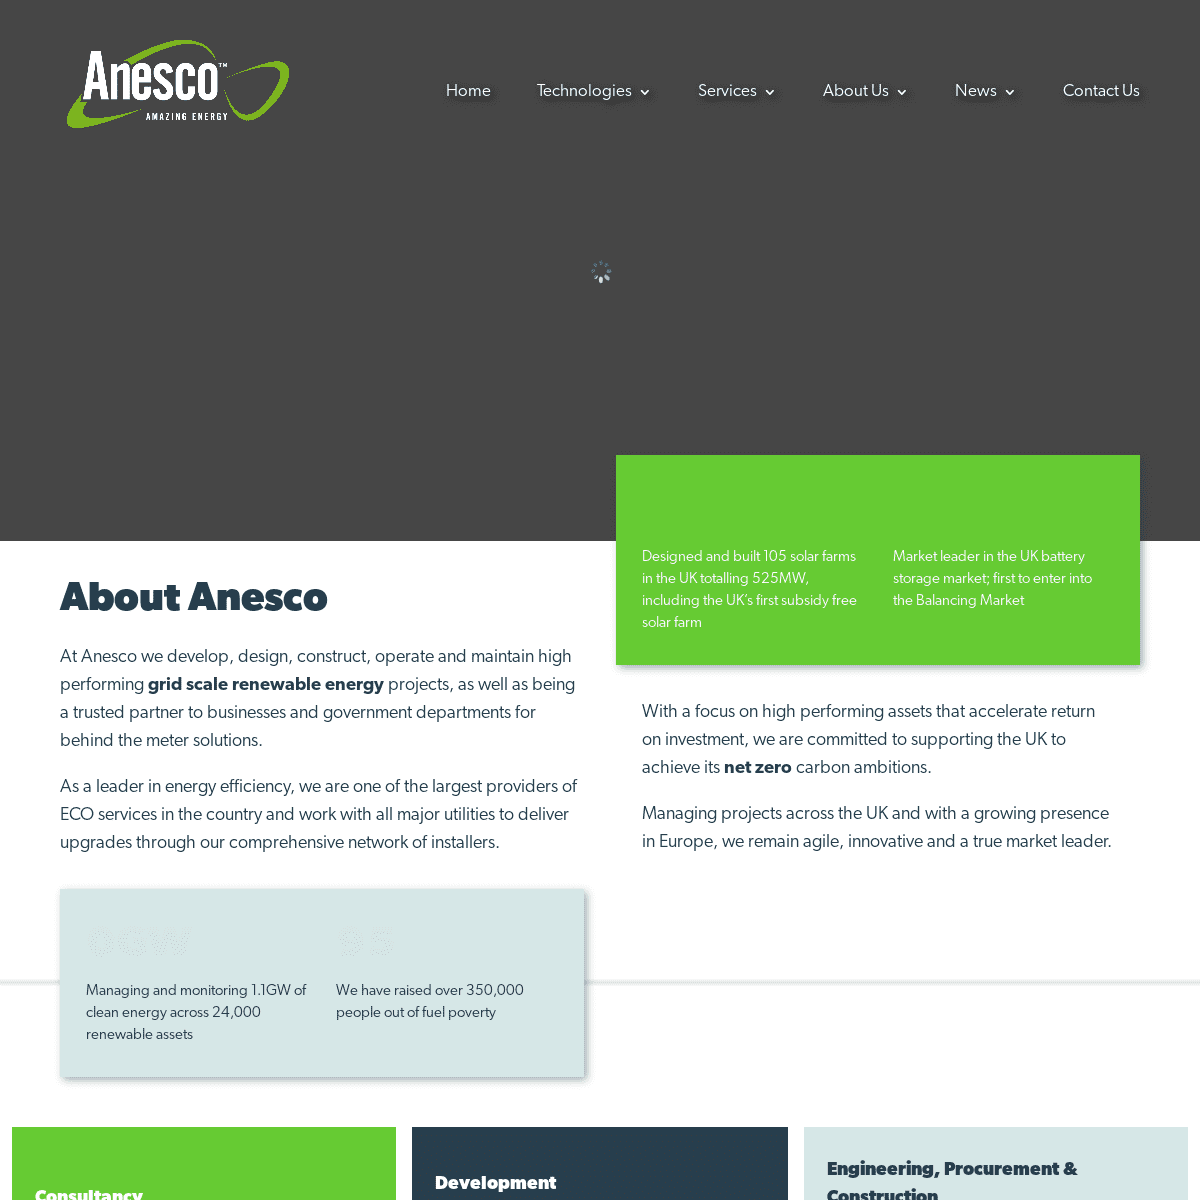 A complete backup of https://anesco.co.uk